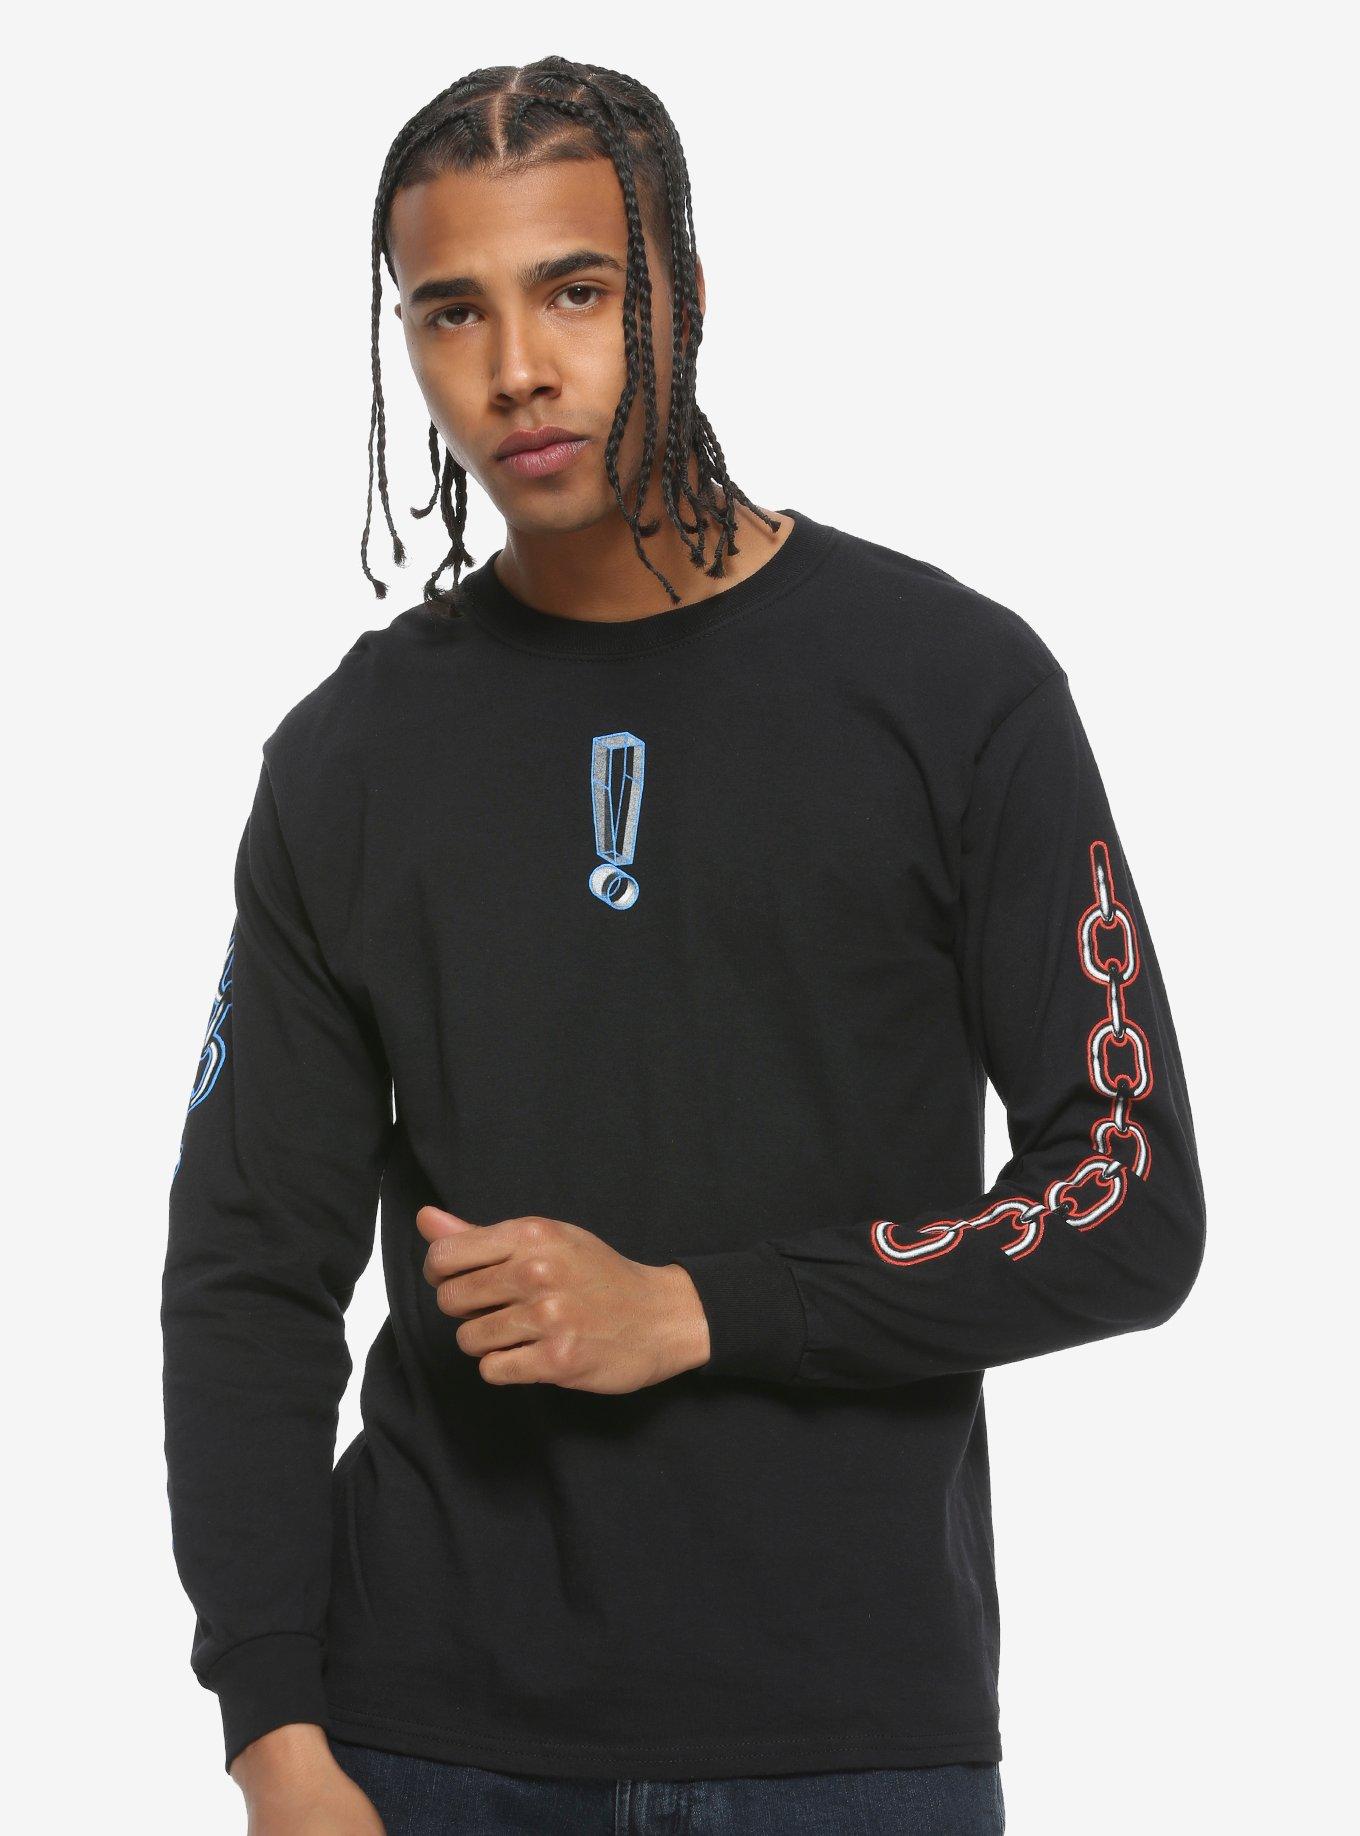 Trippie Redd Exclamation Mark Long-Sleeve T-Shirt | Hot Topic